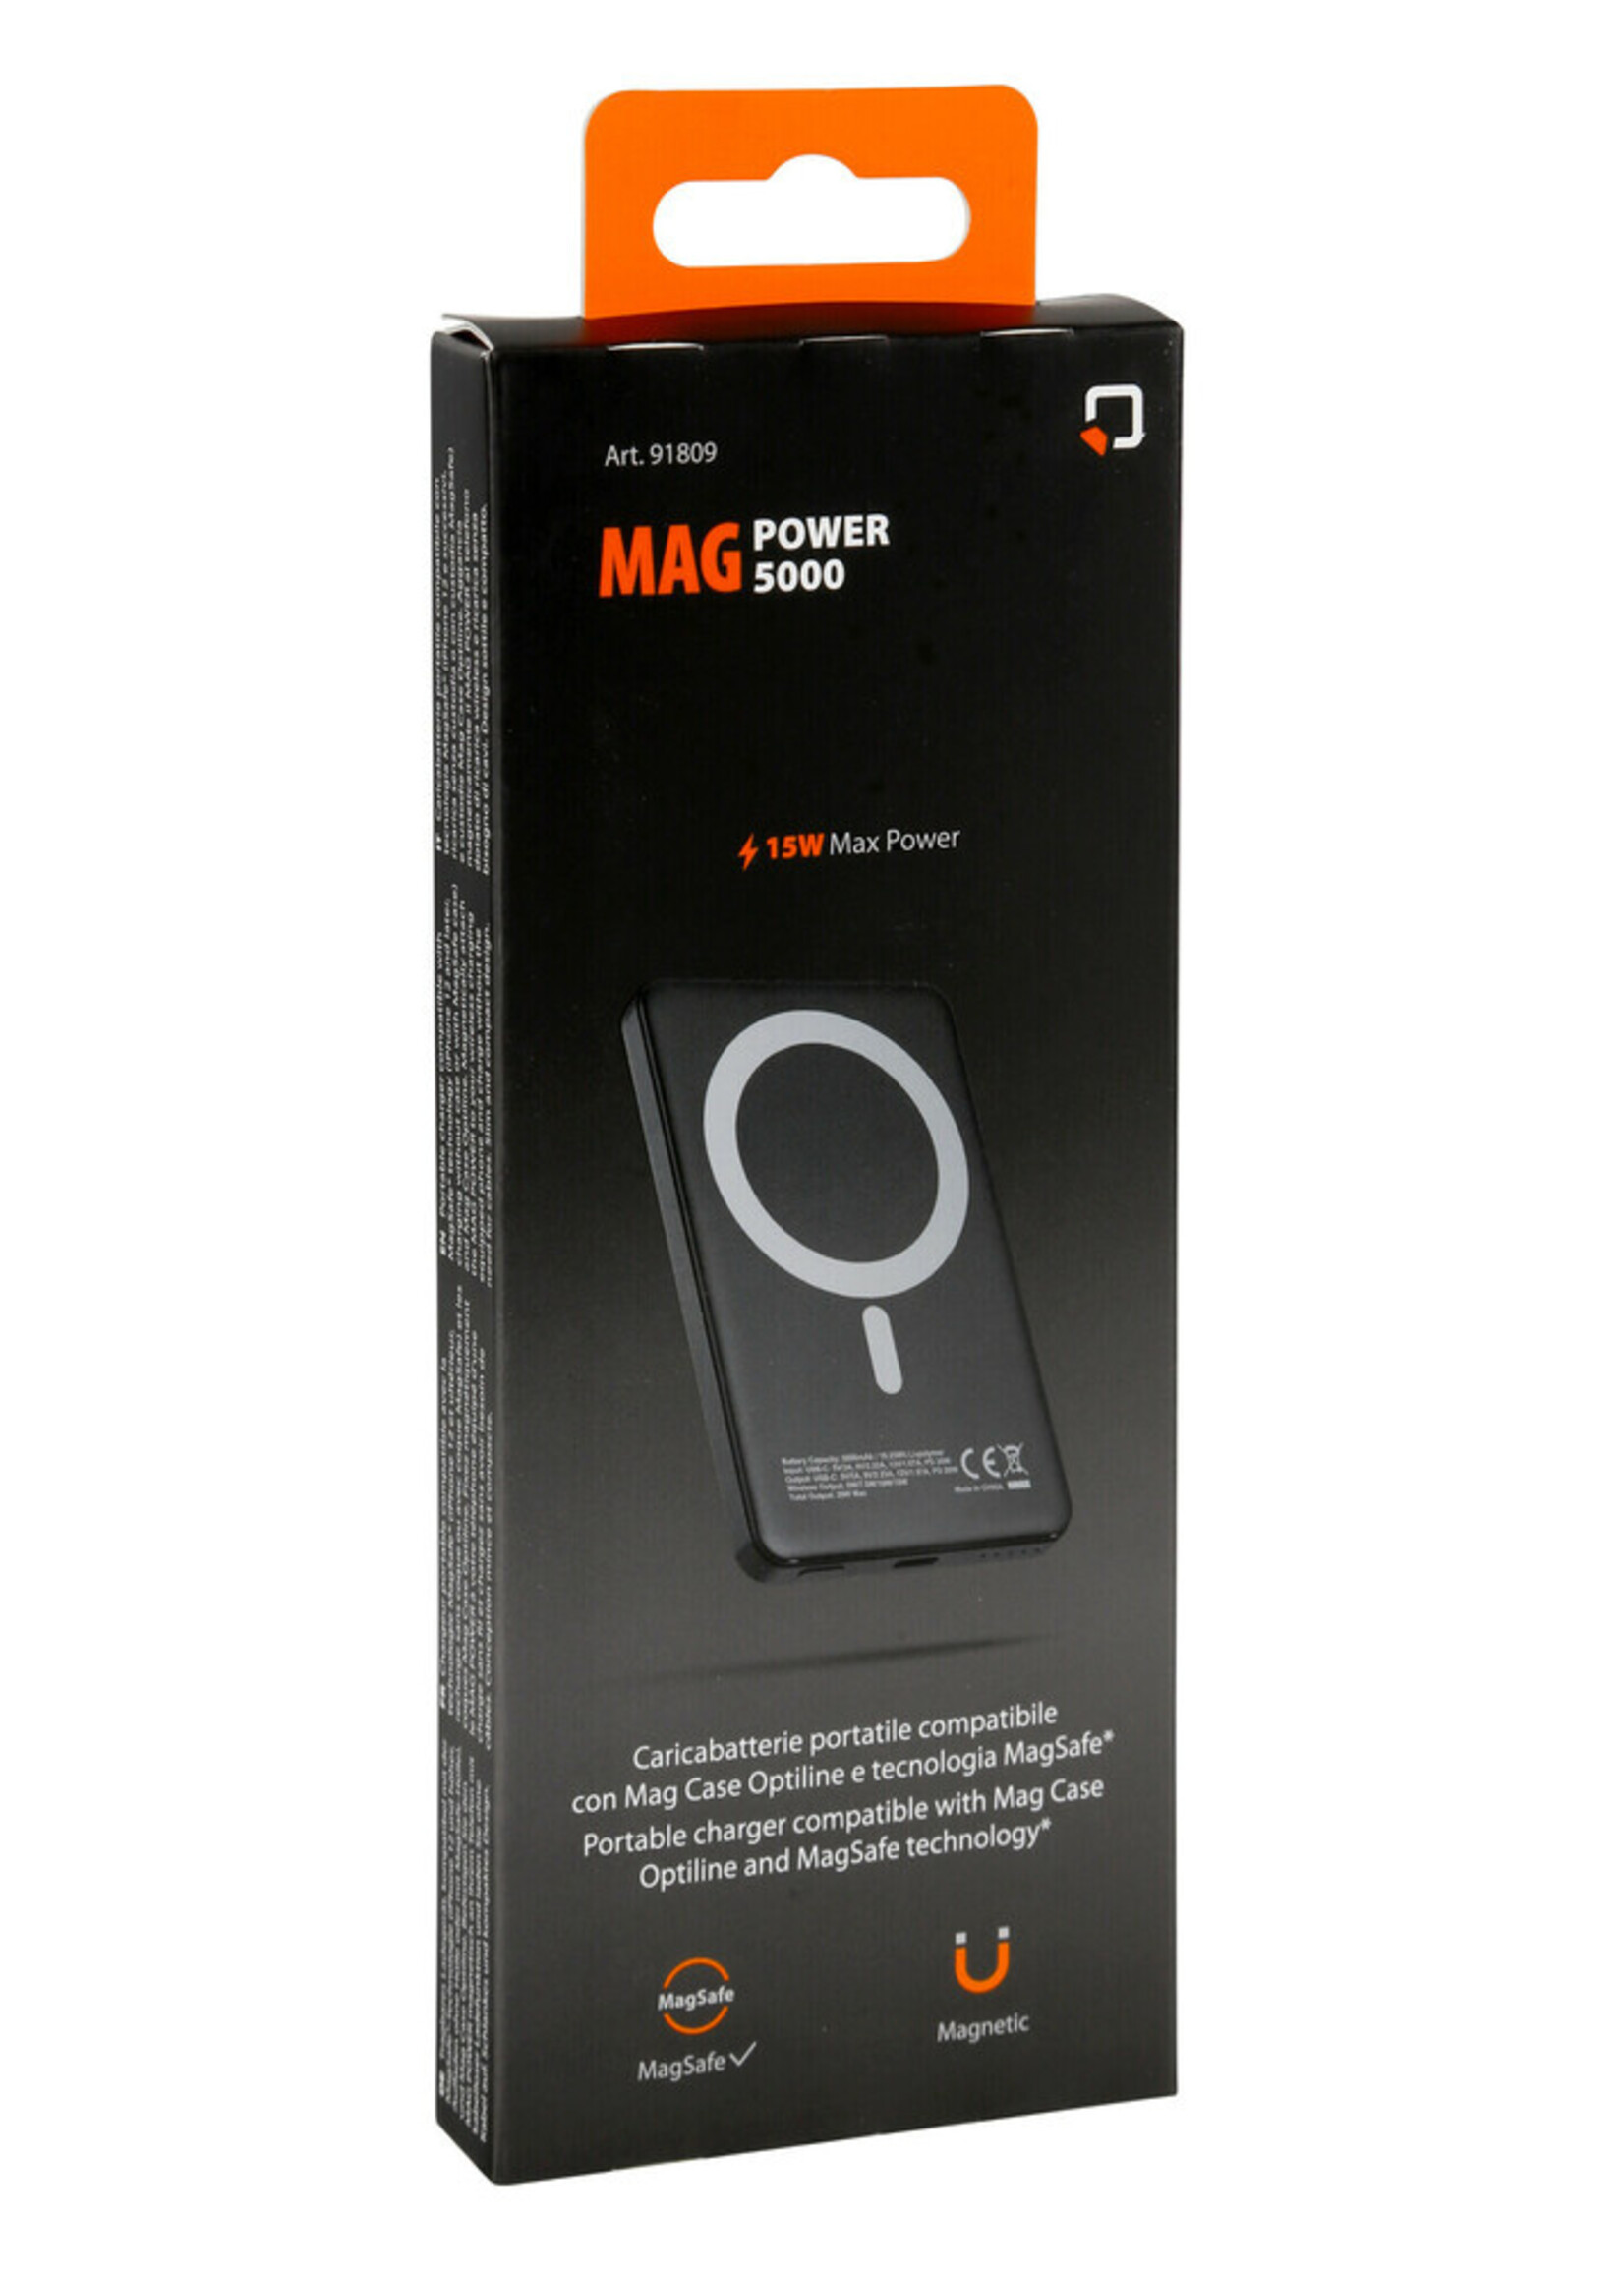 Optiline Mag Powerbank compatible with Mag Case Optiline and MagSafe technology